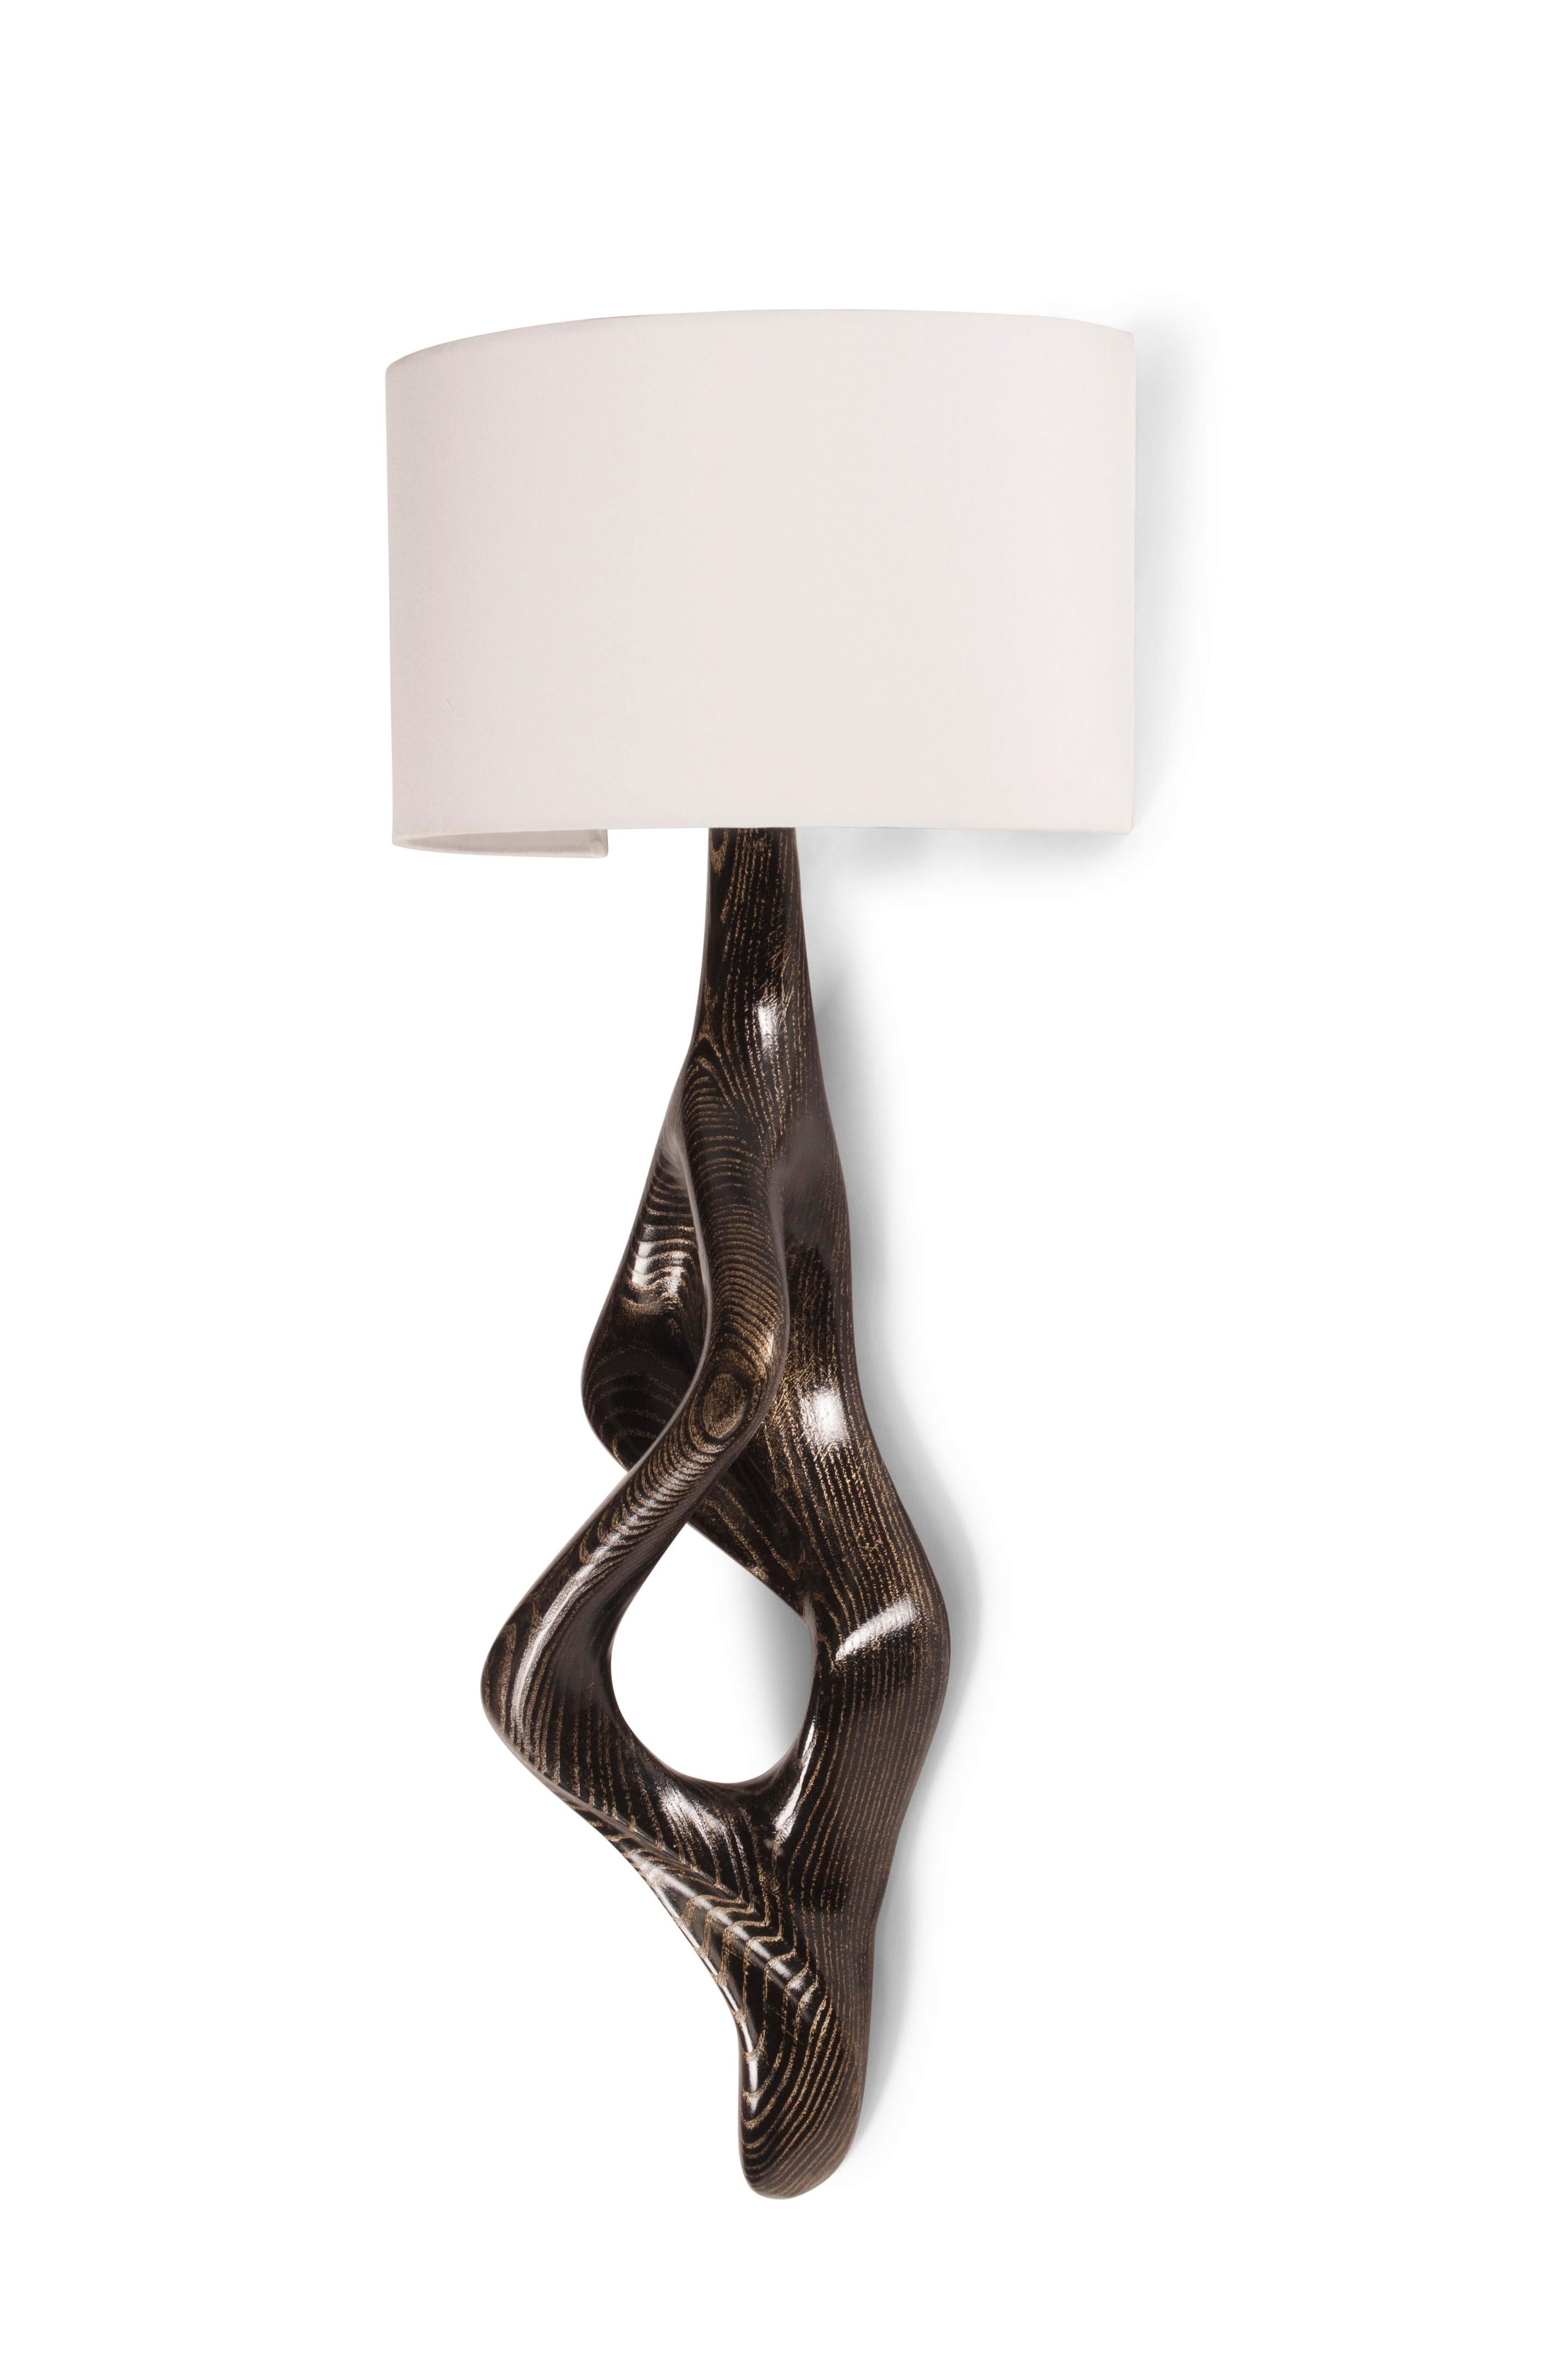 American Amorph Nomi Sconces Golden Ebony stain on Ash wood with Ivory Silk Shade For Sale